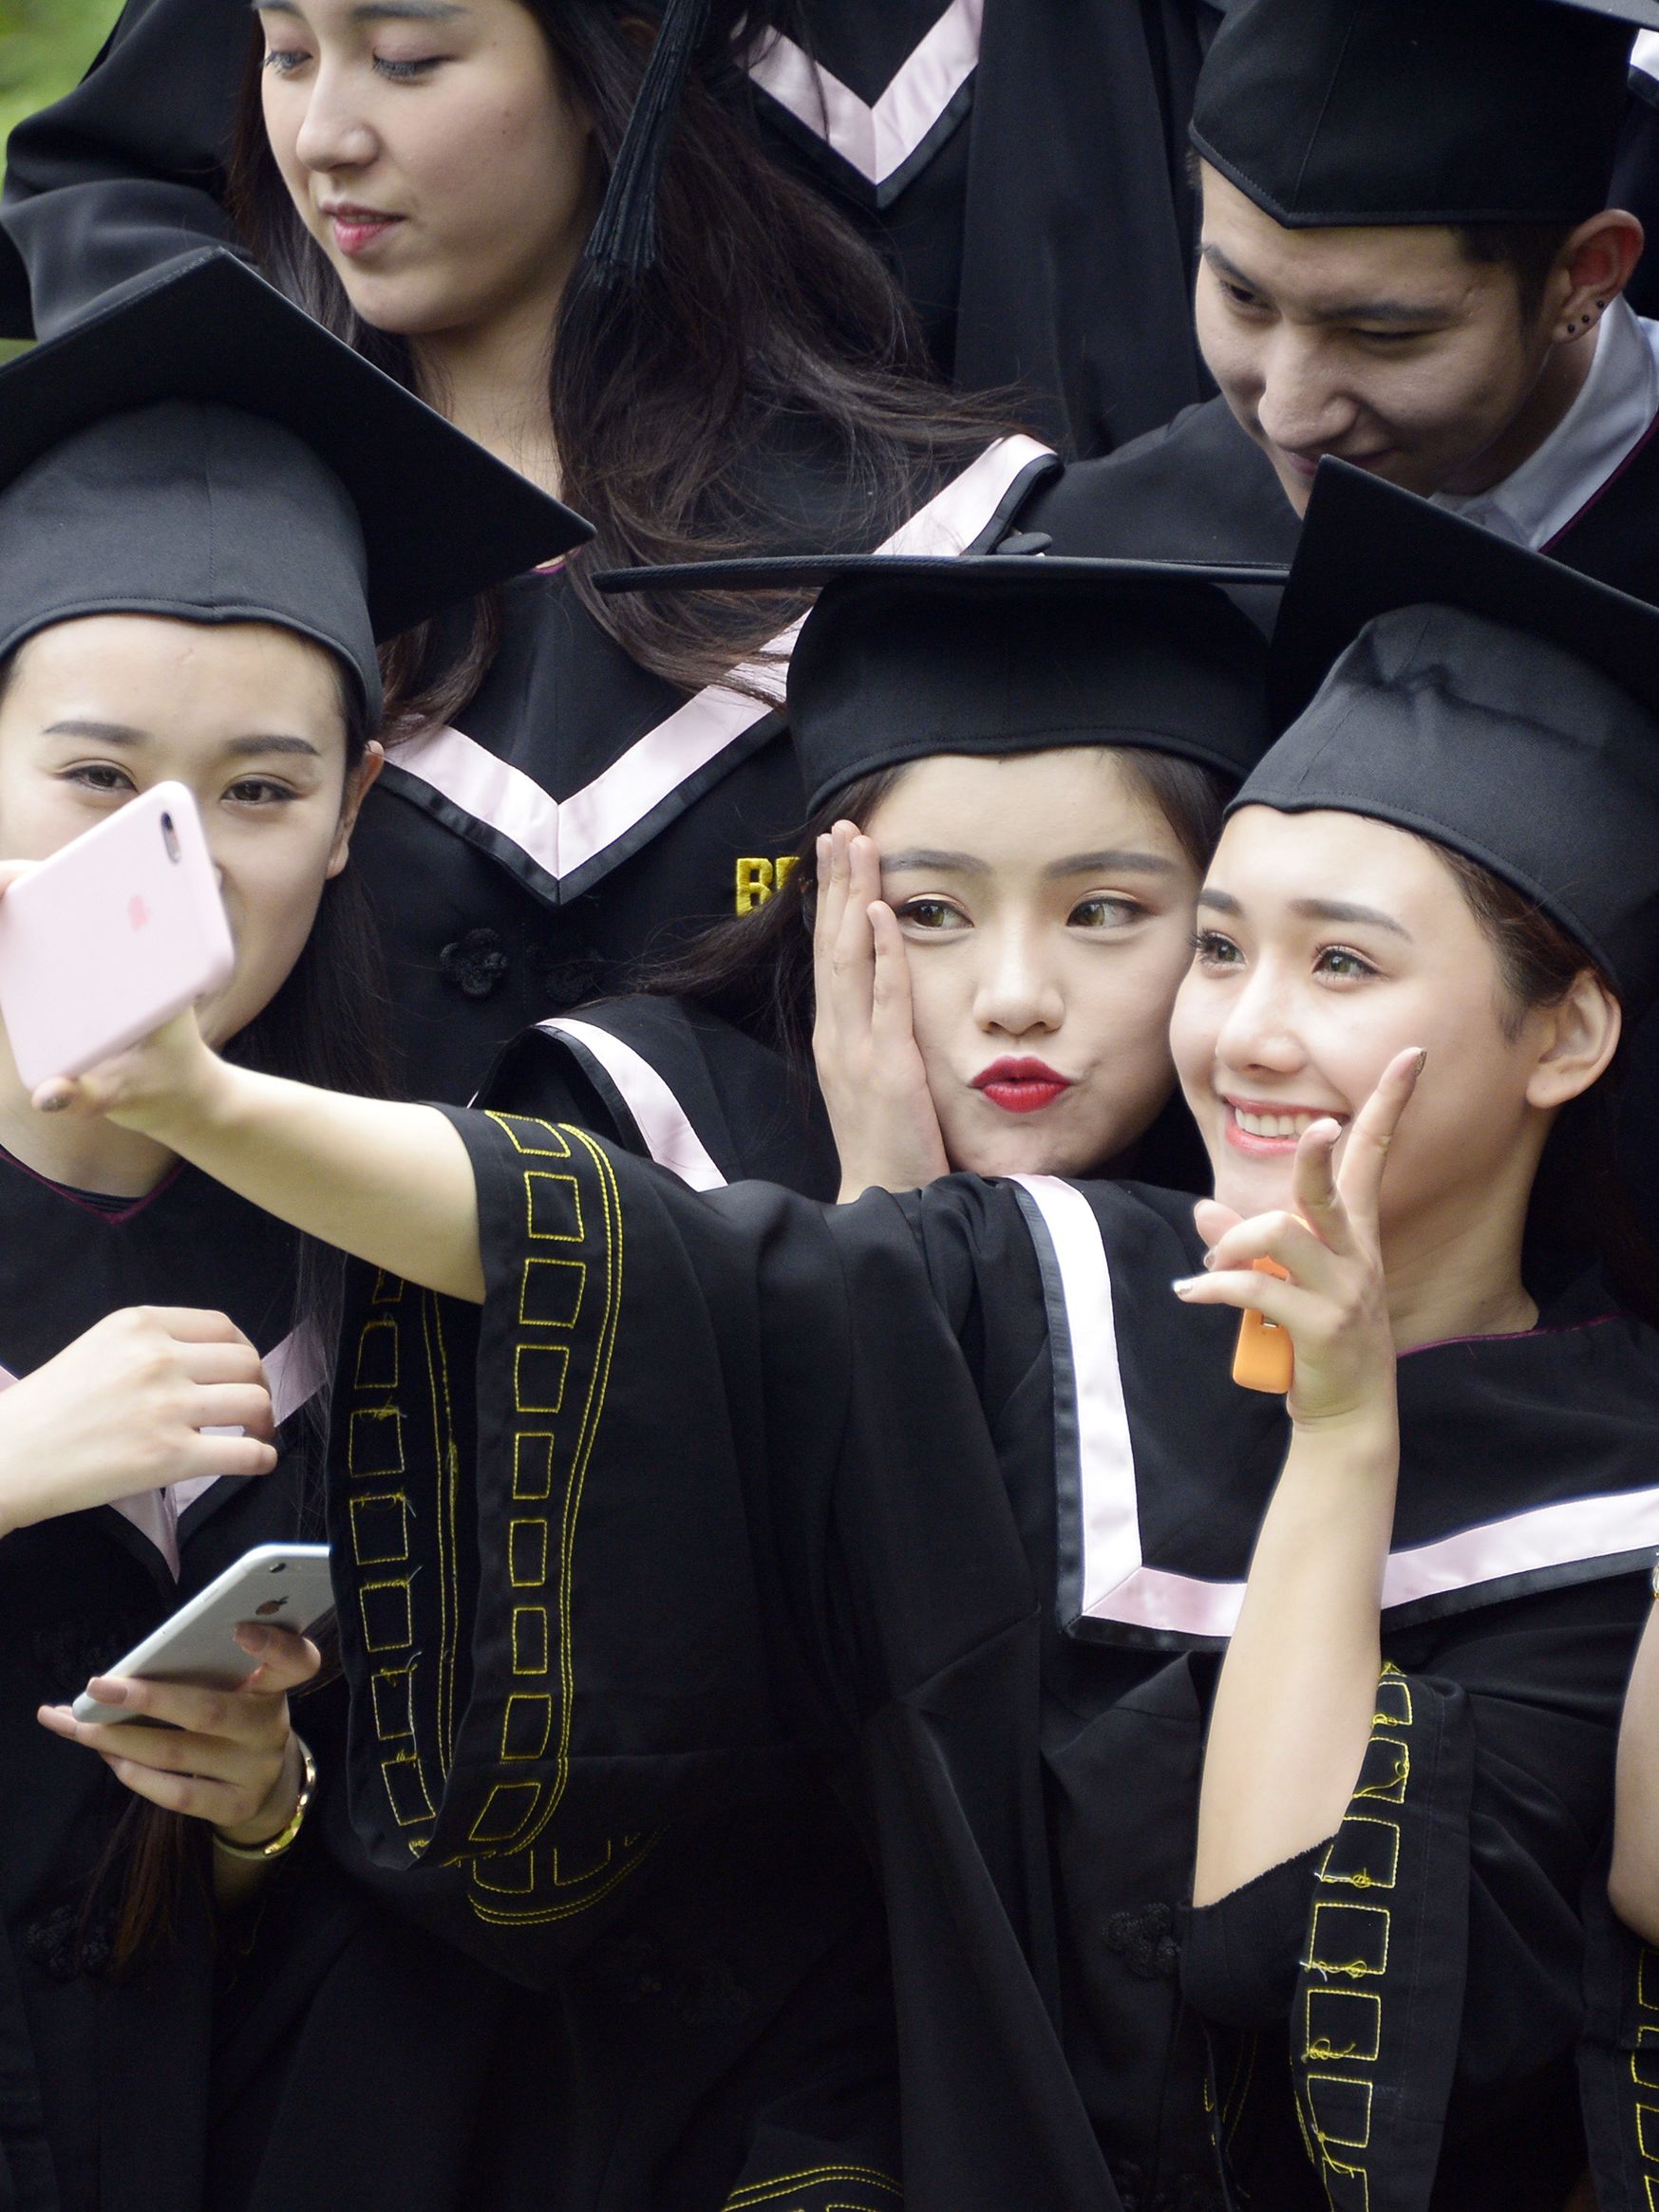 Cute Teen Girls Nice Cleavage - China's lack of sex education is putting millions of young people at risk |  CNN